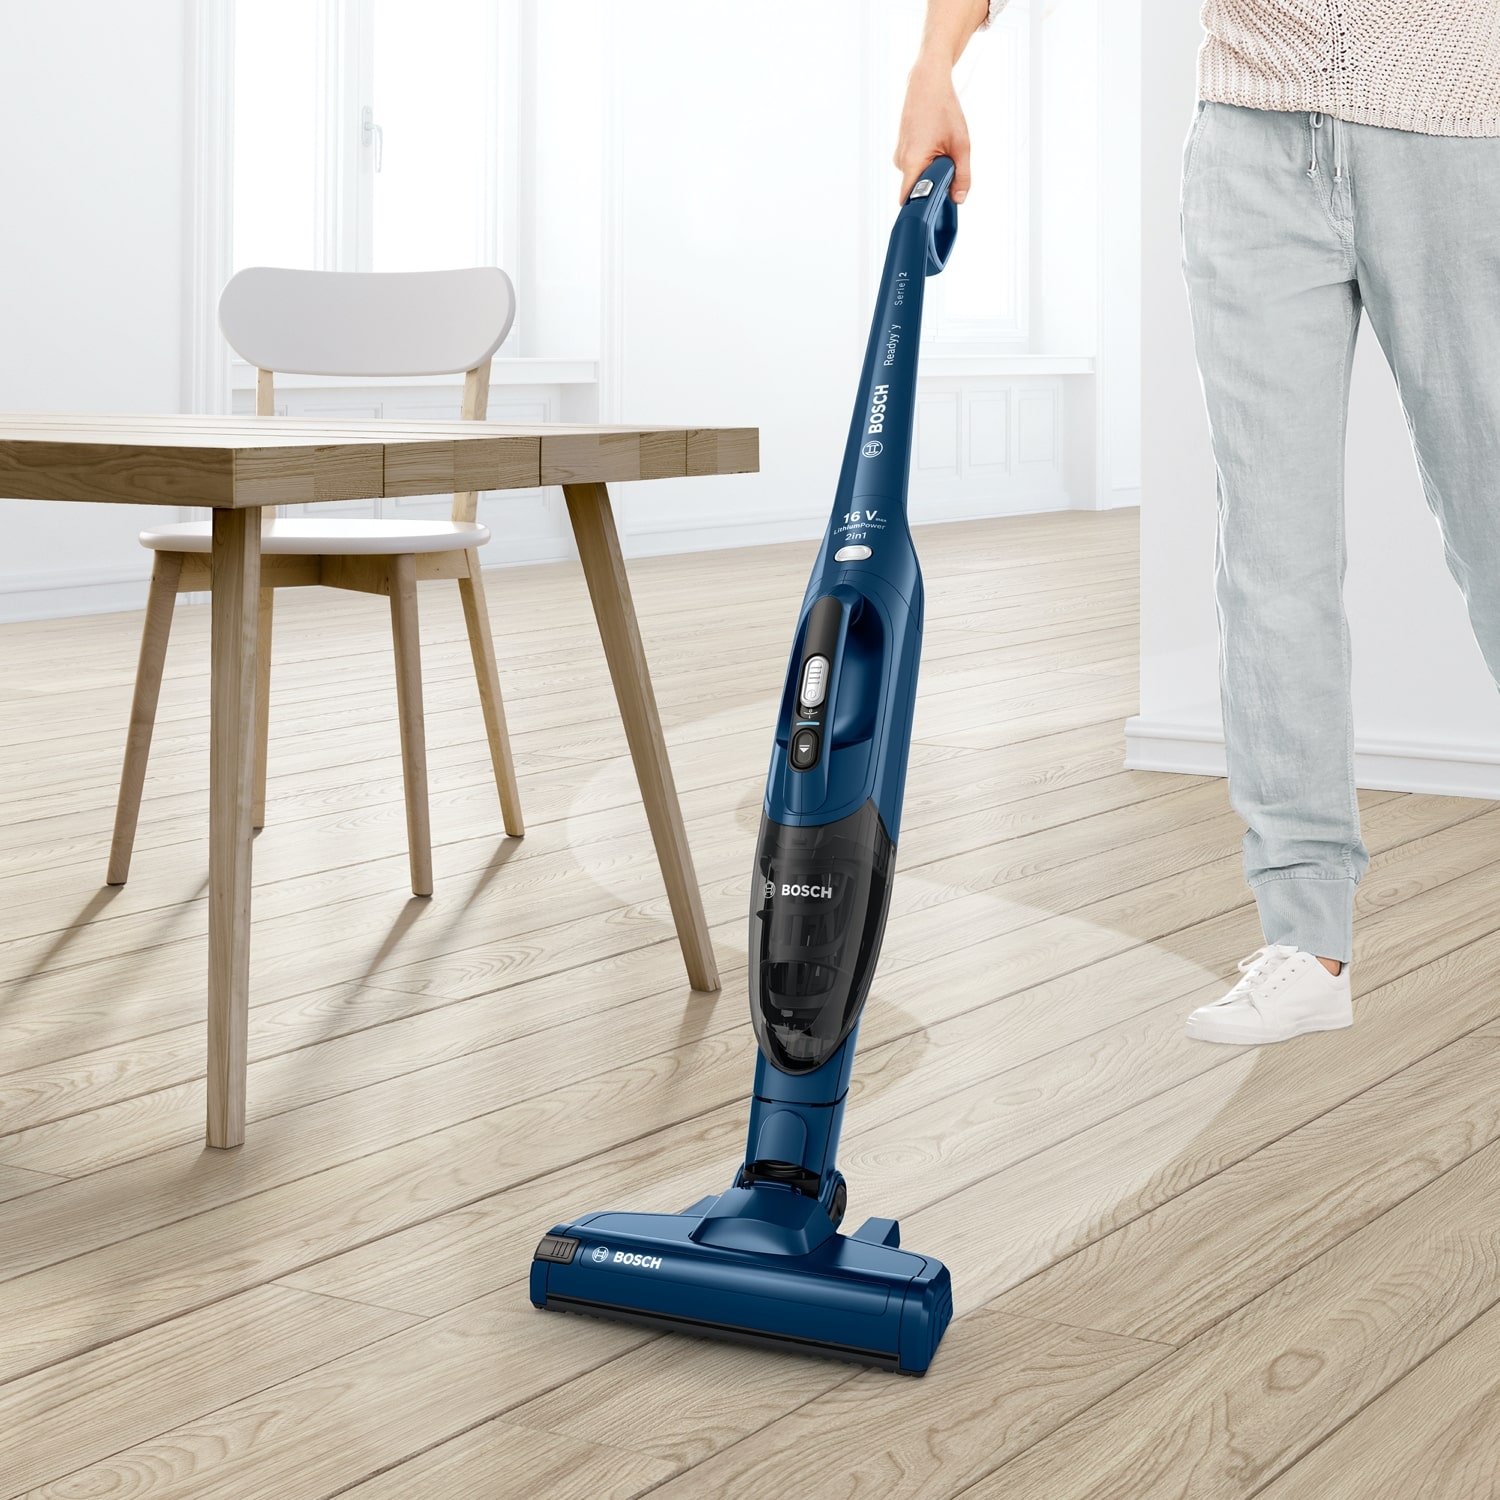 Bosch BCHF216GB Cordless Vacuum Cleaner - 40 Minute Run Time - 7